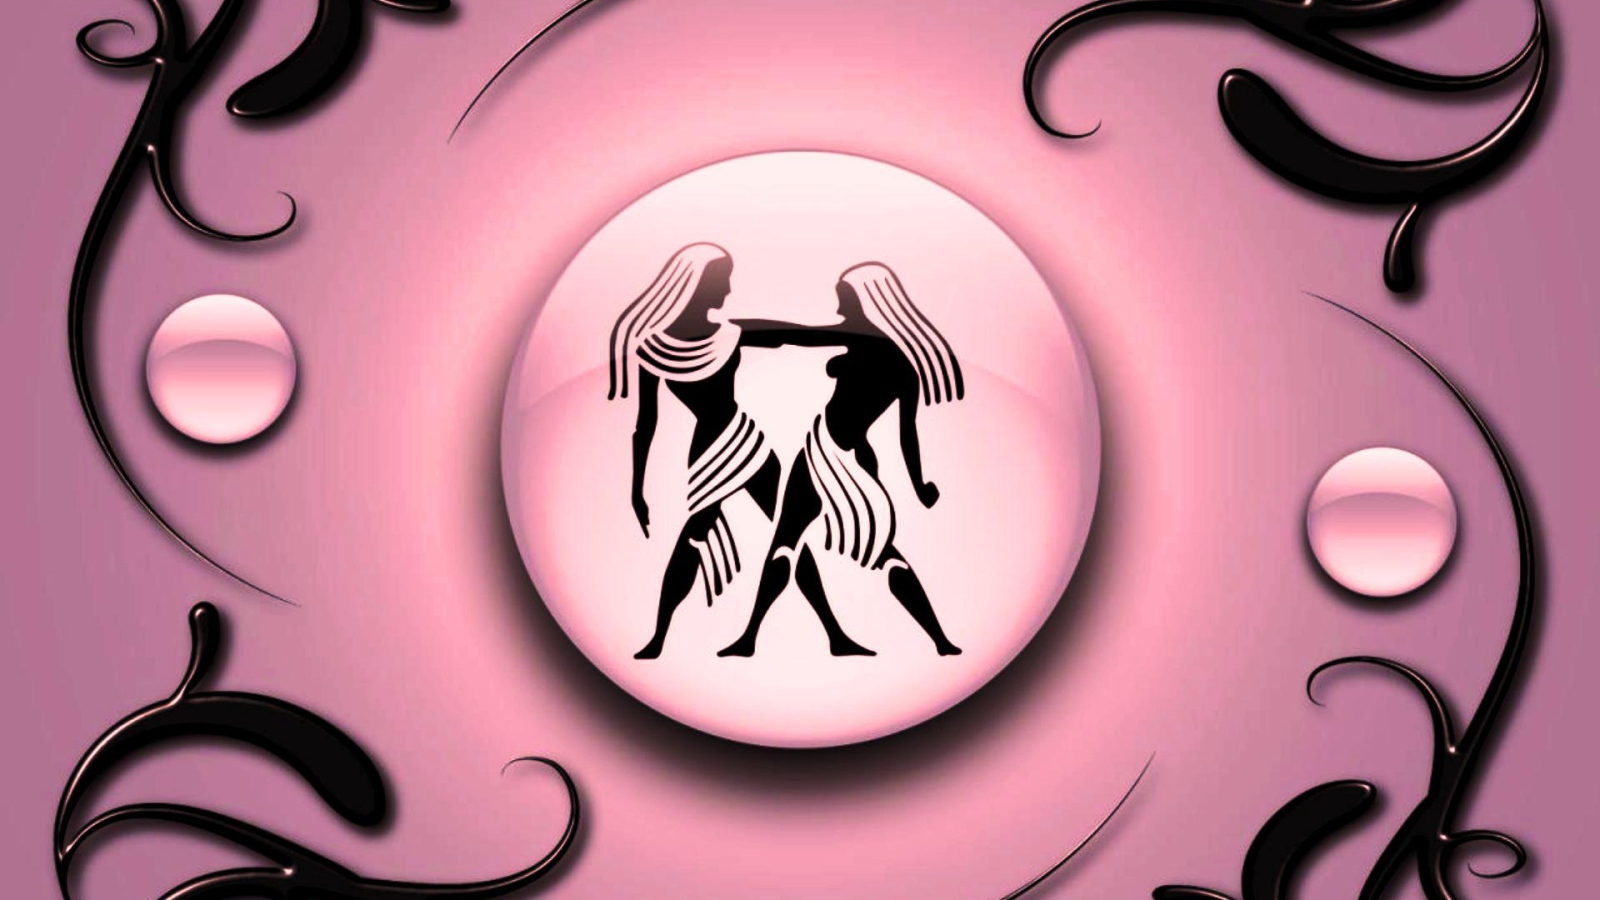 Gemini on a pink background with black ornament 